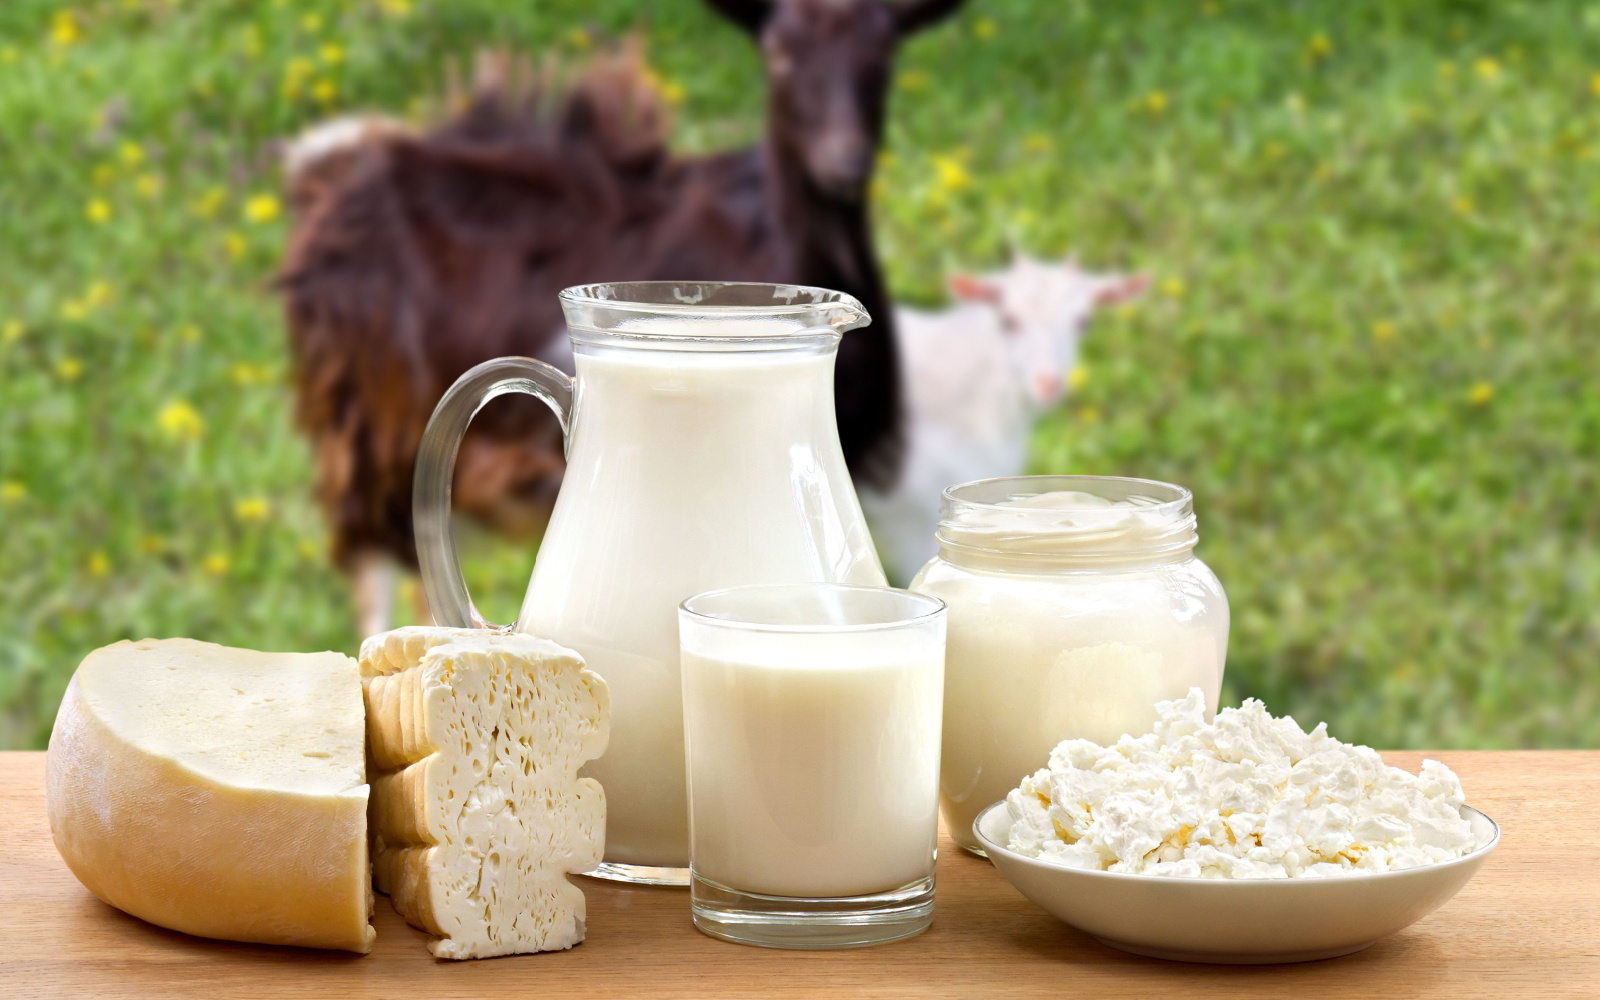 5 Goat Milk Benefits for Hair | Our No-B.S. Take